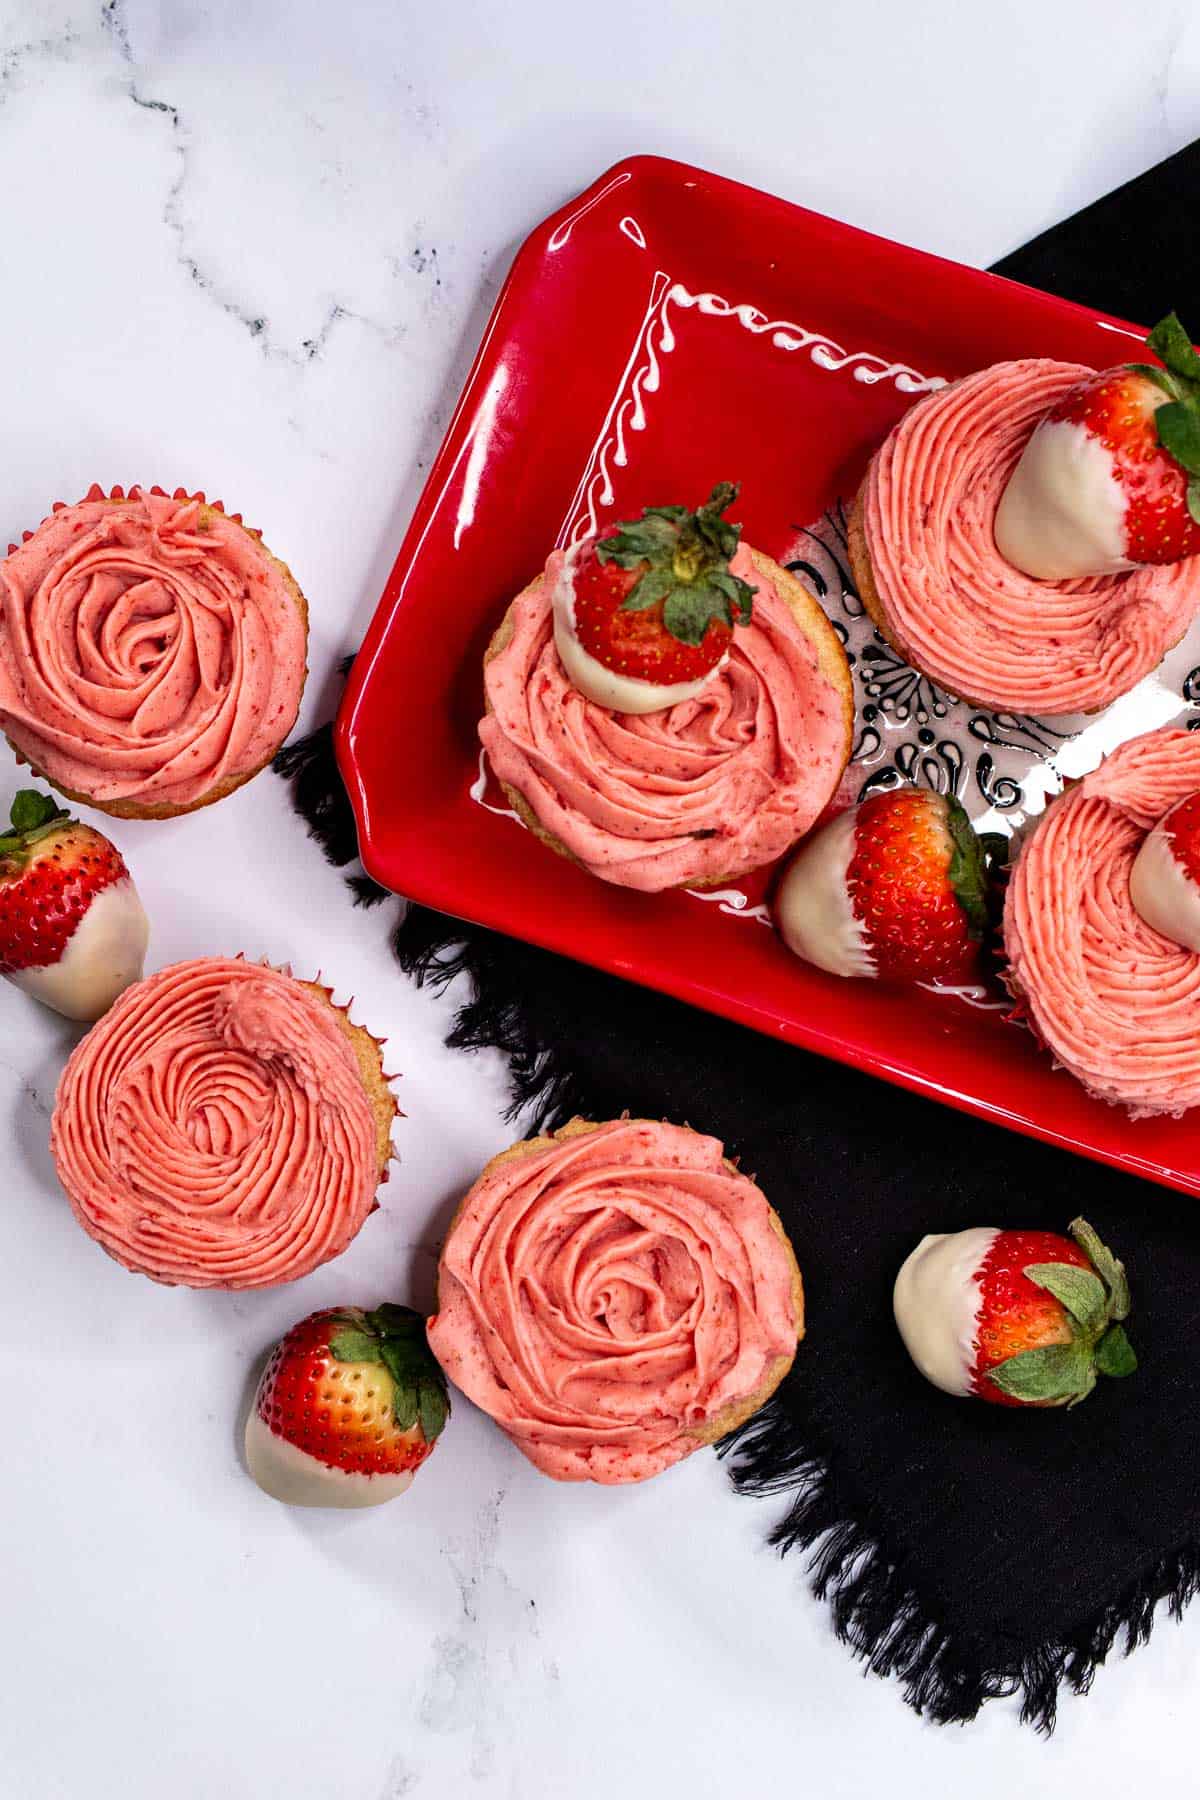 Overhead view of white chocolate strawberry cupcakes topped with strawberry buttercream rosettes and white chocolate dipped strawberries.